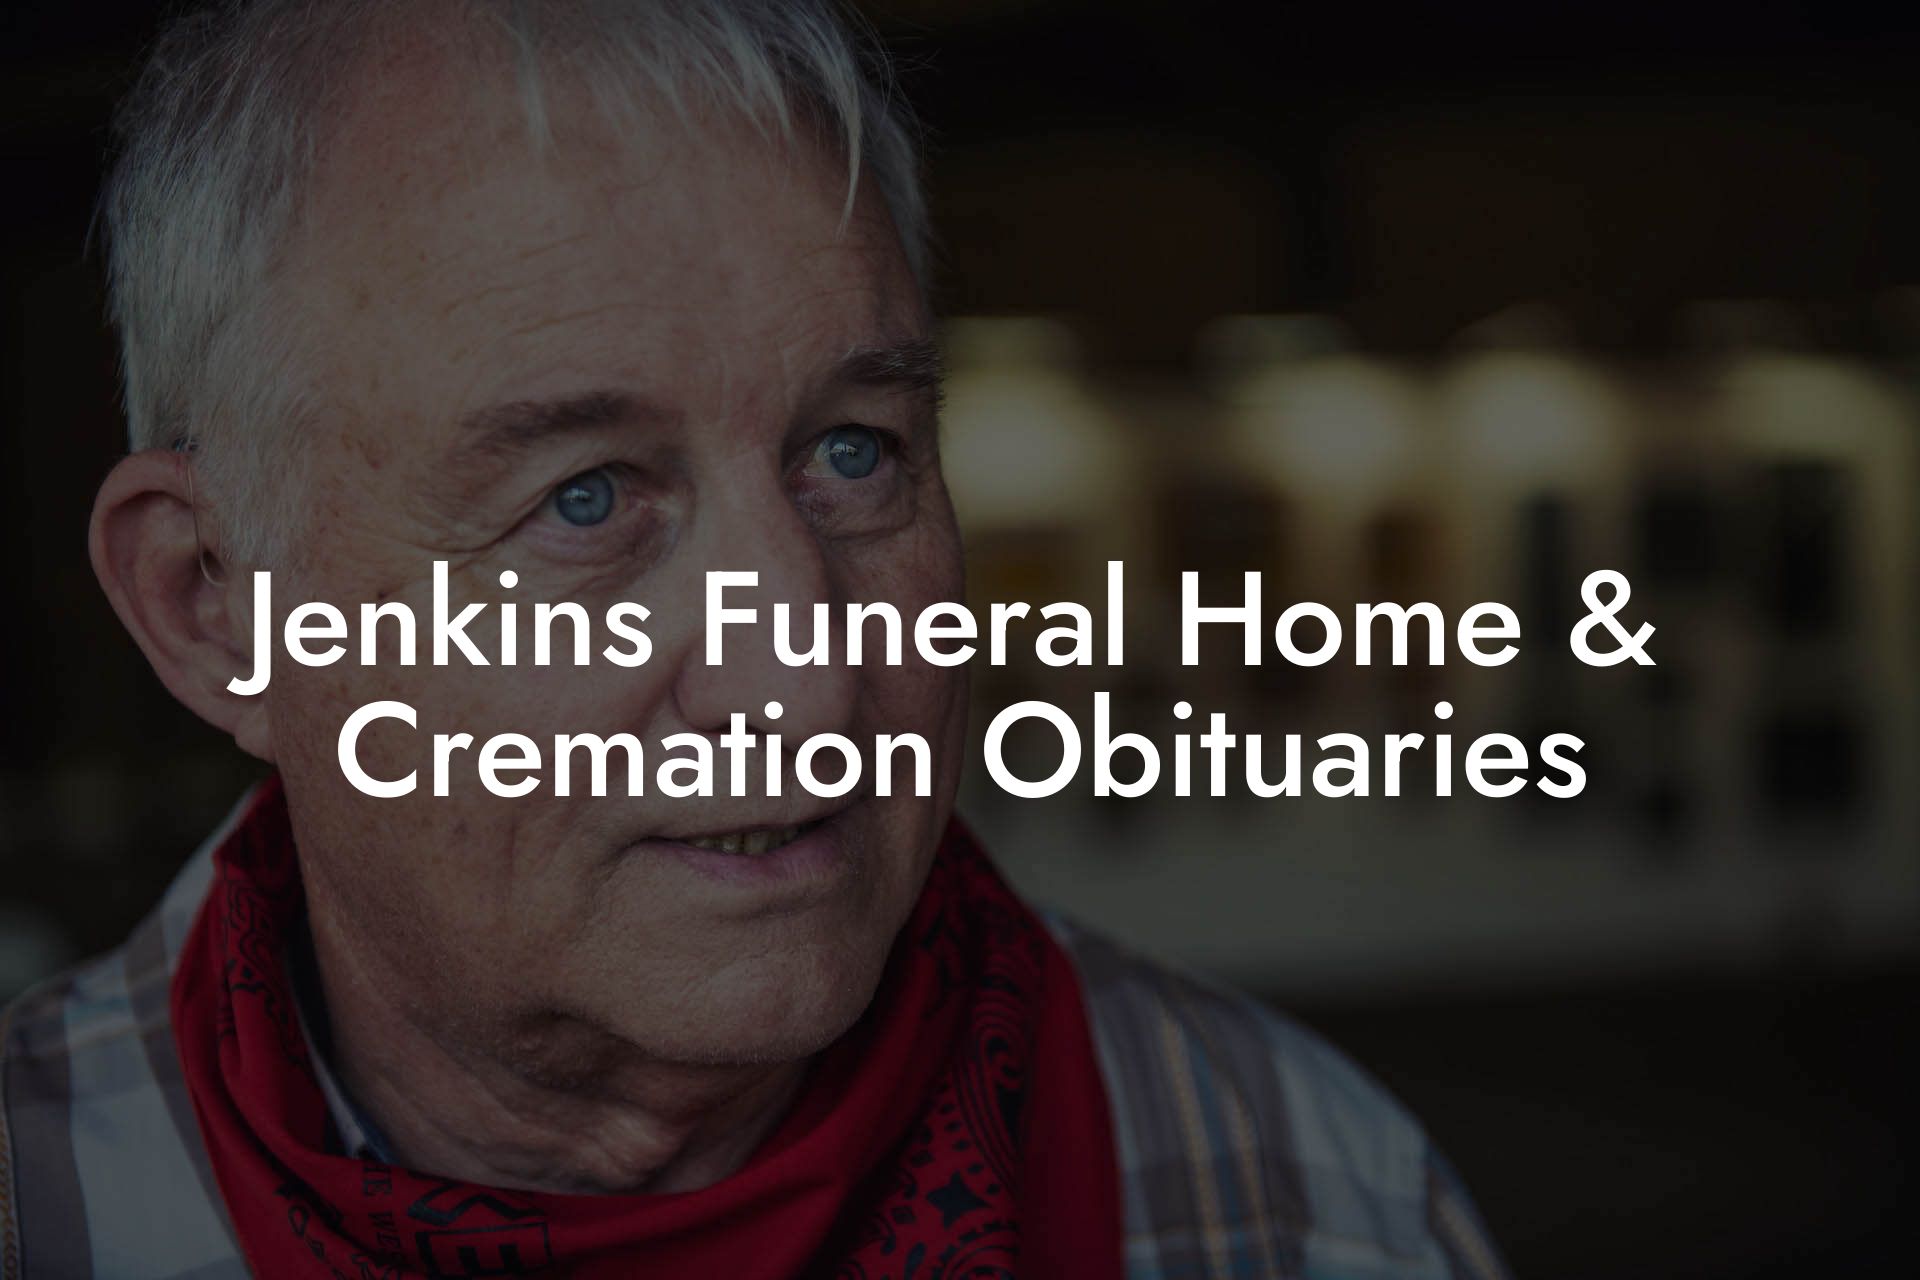 Jenkins Funeral Home & Cremation Obituaries - Eulogy Assistant